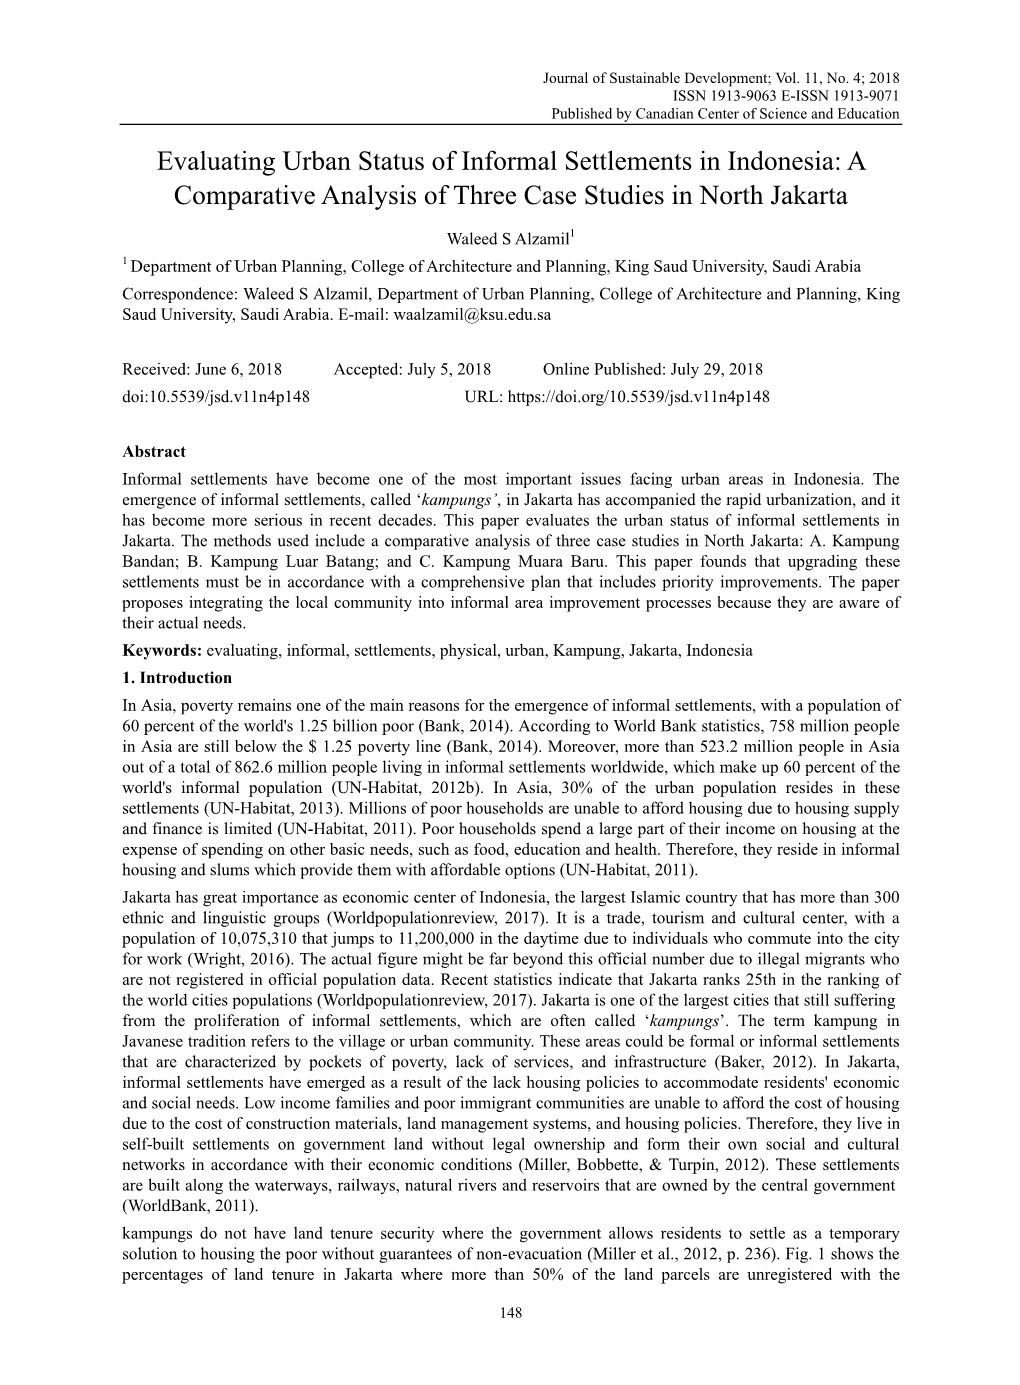 Evaluating Urban Status of Informal Settlements in Indonesia: a Comparative Analysis of Three Case Studies in North Jakarta